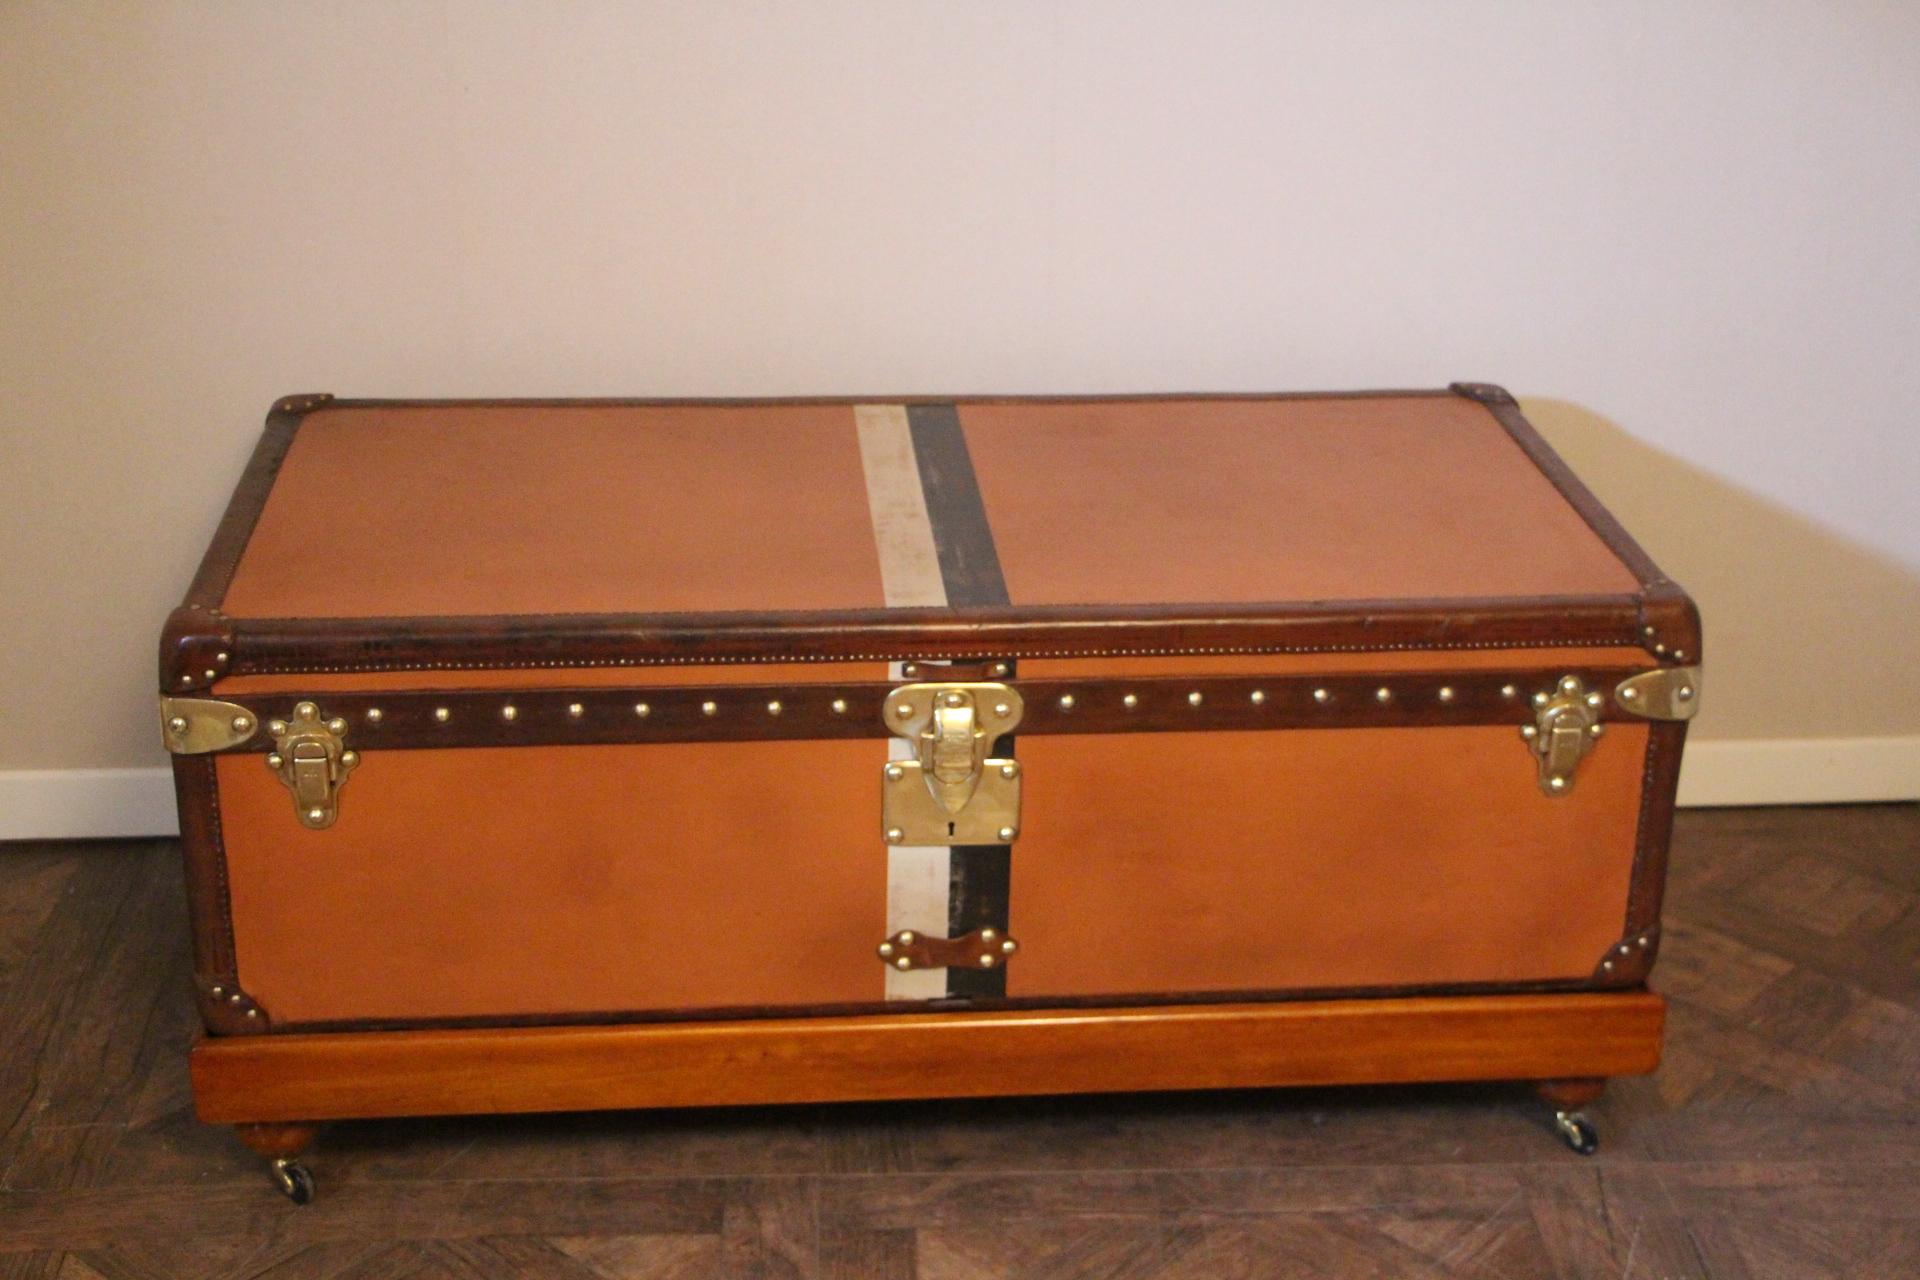 This very nice orange canvas Louis Vuitton steamer trunk, features Louis Vuitton stamped solid brass lock, clasps as well as all its studs. Beautiful and rich honey color leather trim and handles. Unusual and elegant proportions.
It is typically